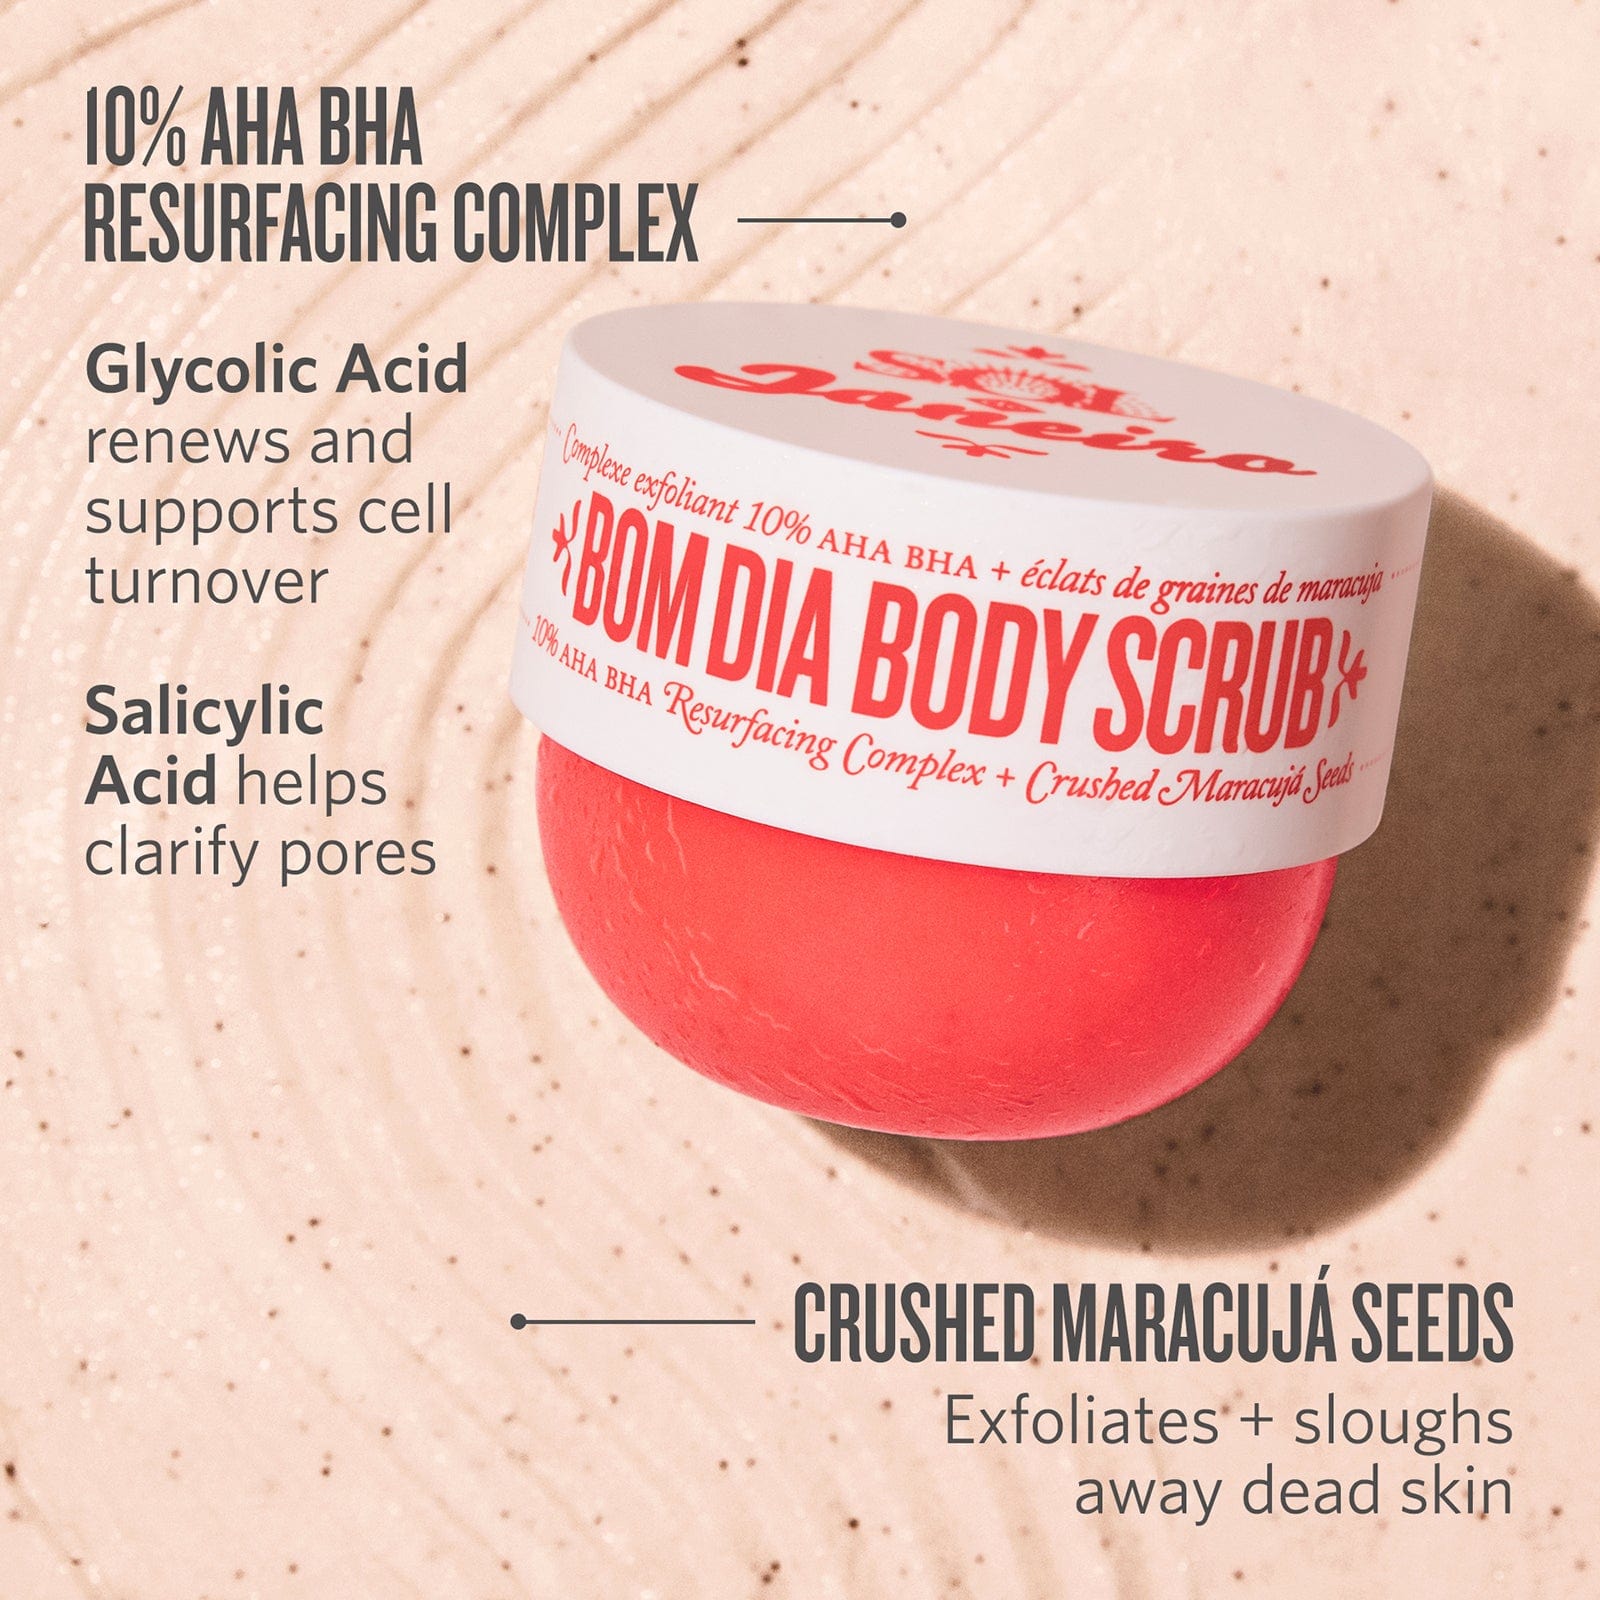 10% AHA BHA Resurfacing Complex - Glycolic Acid: renews and supports cell turnover - Salicylic Acid: helps clarify pores - Crushed Maracuja Seeds: exfoliates and sloughs away dead skin